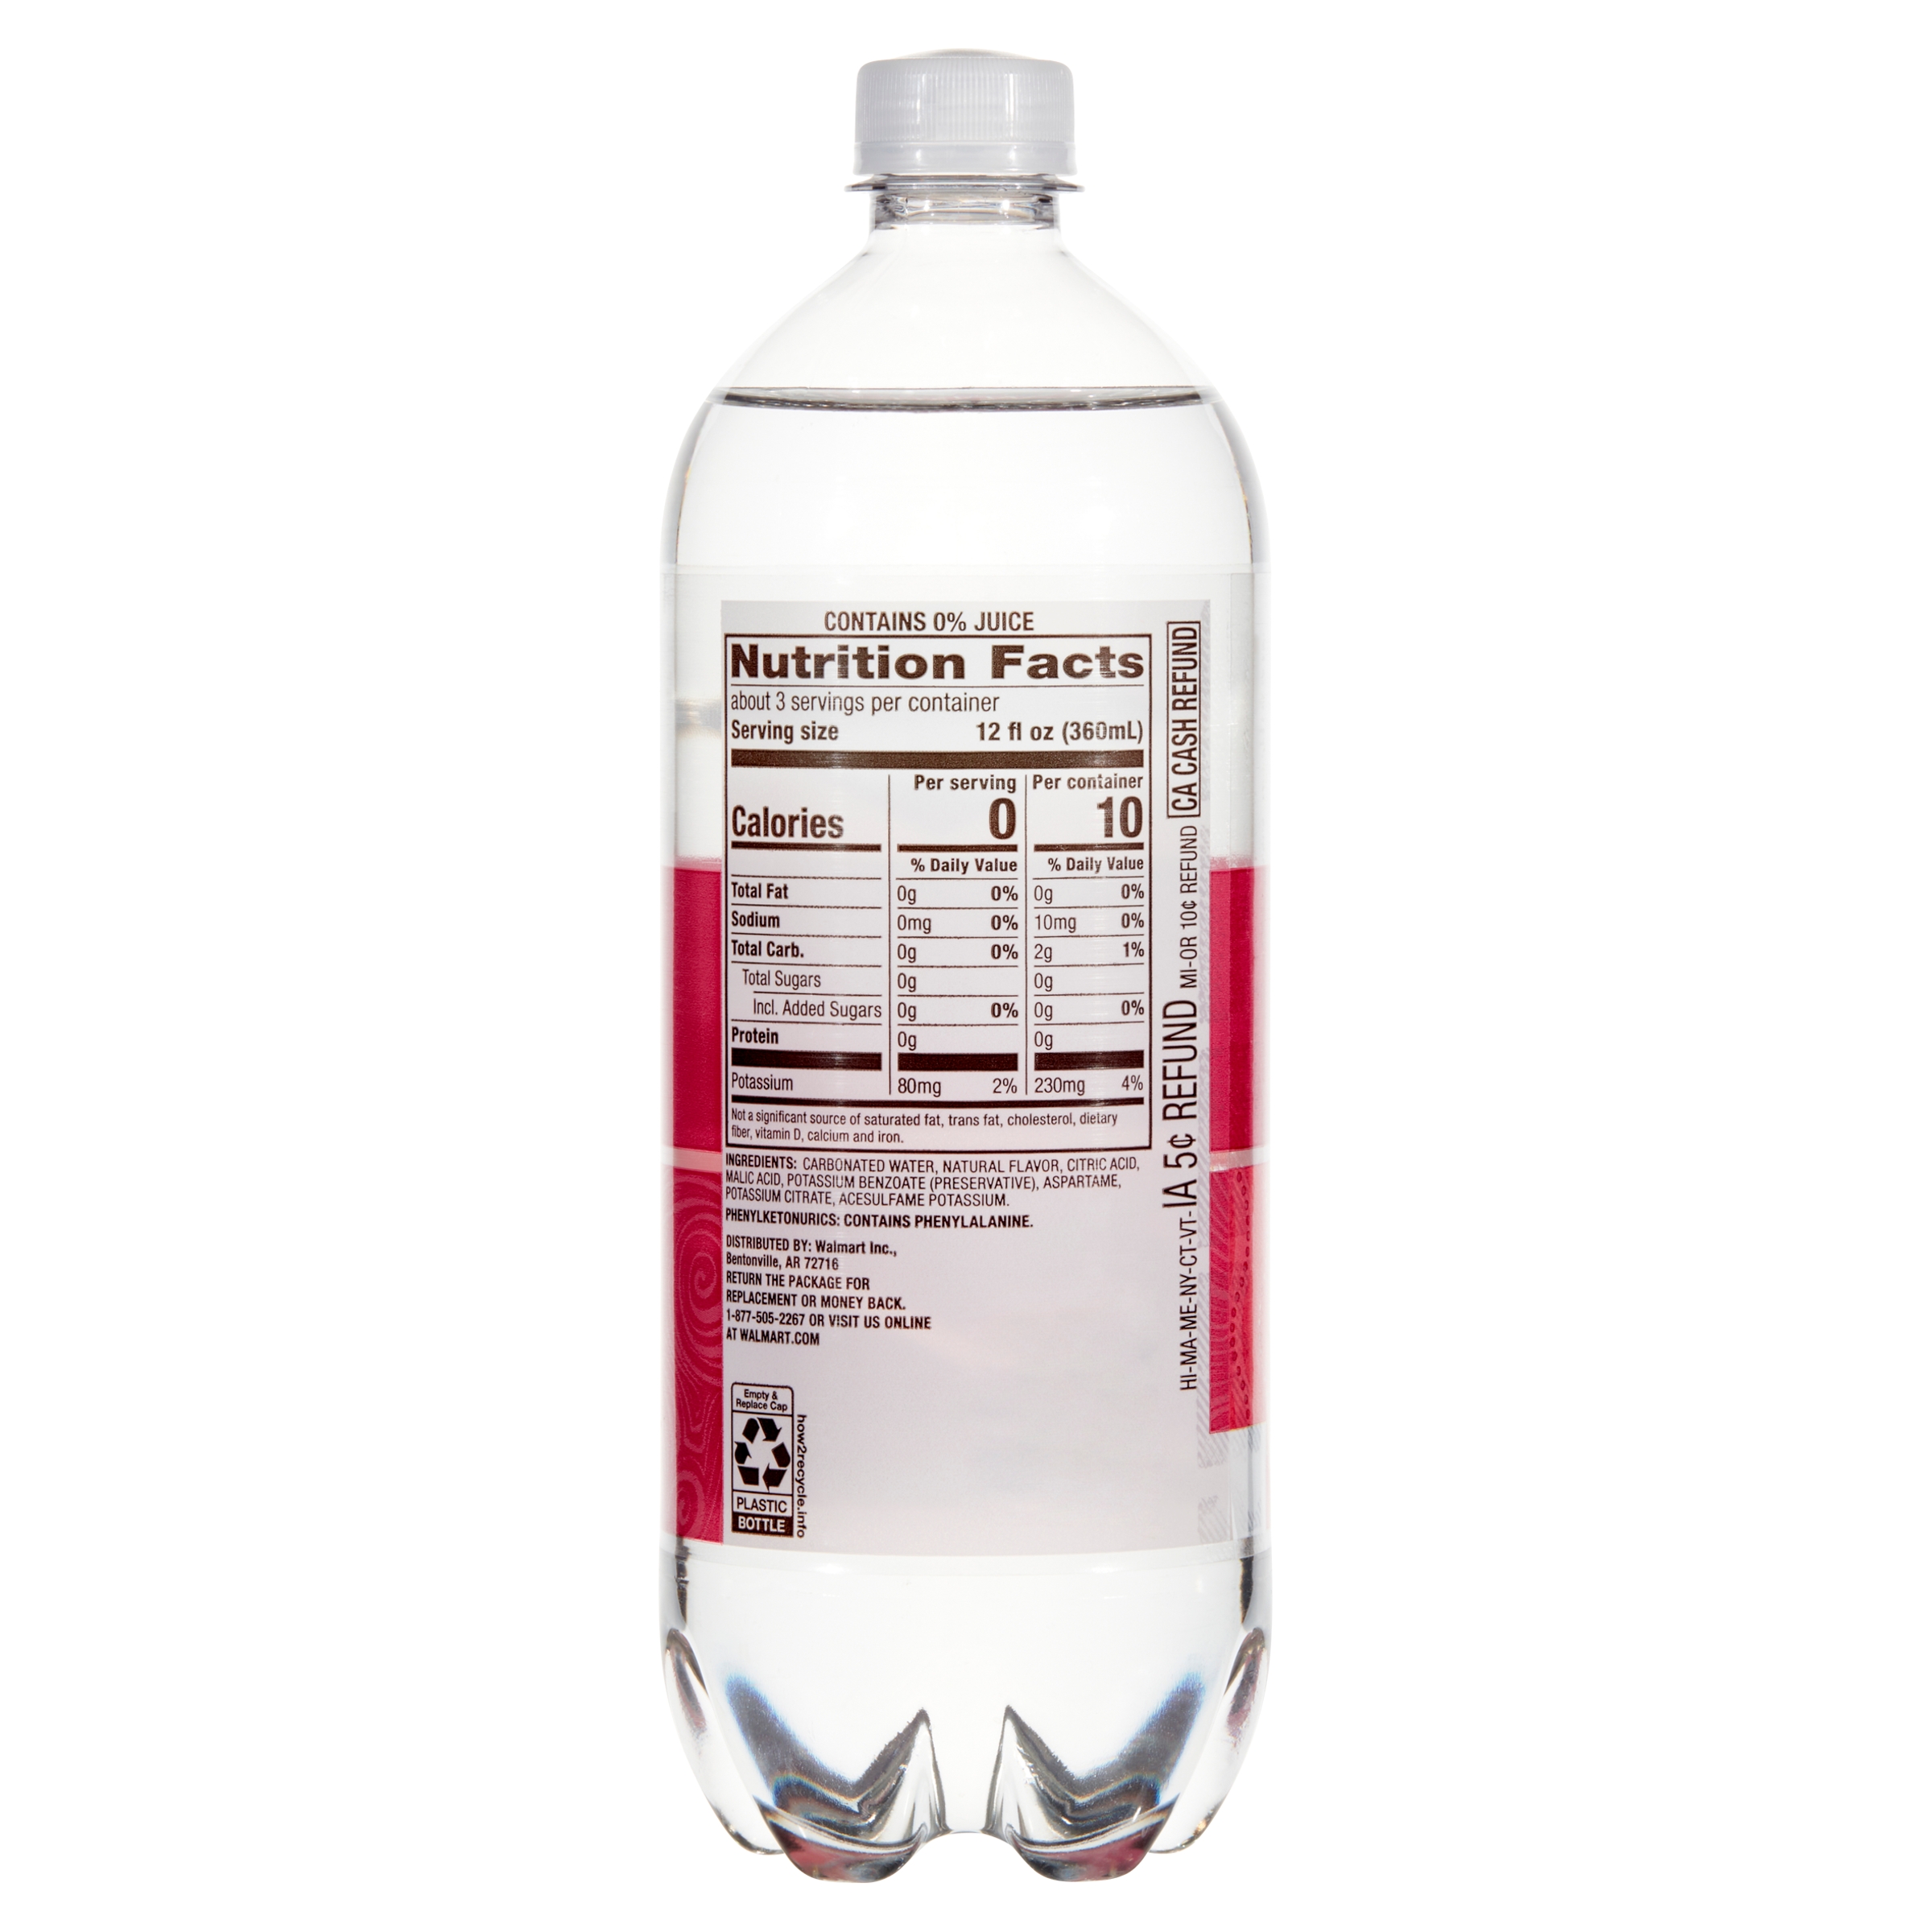 Clear American Sparkling Water, Wild Cherry, 33.8 fl oz - image 5 of 7